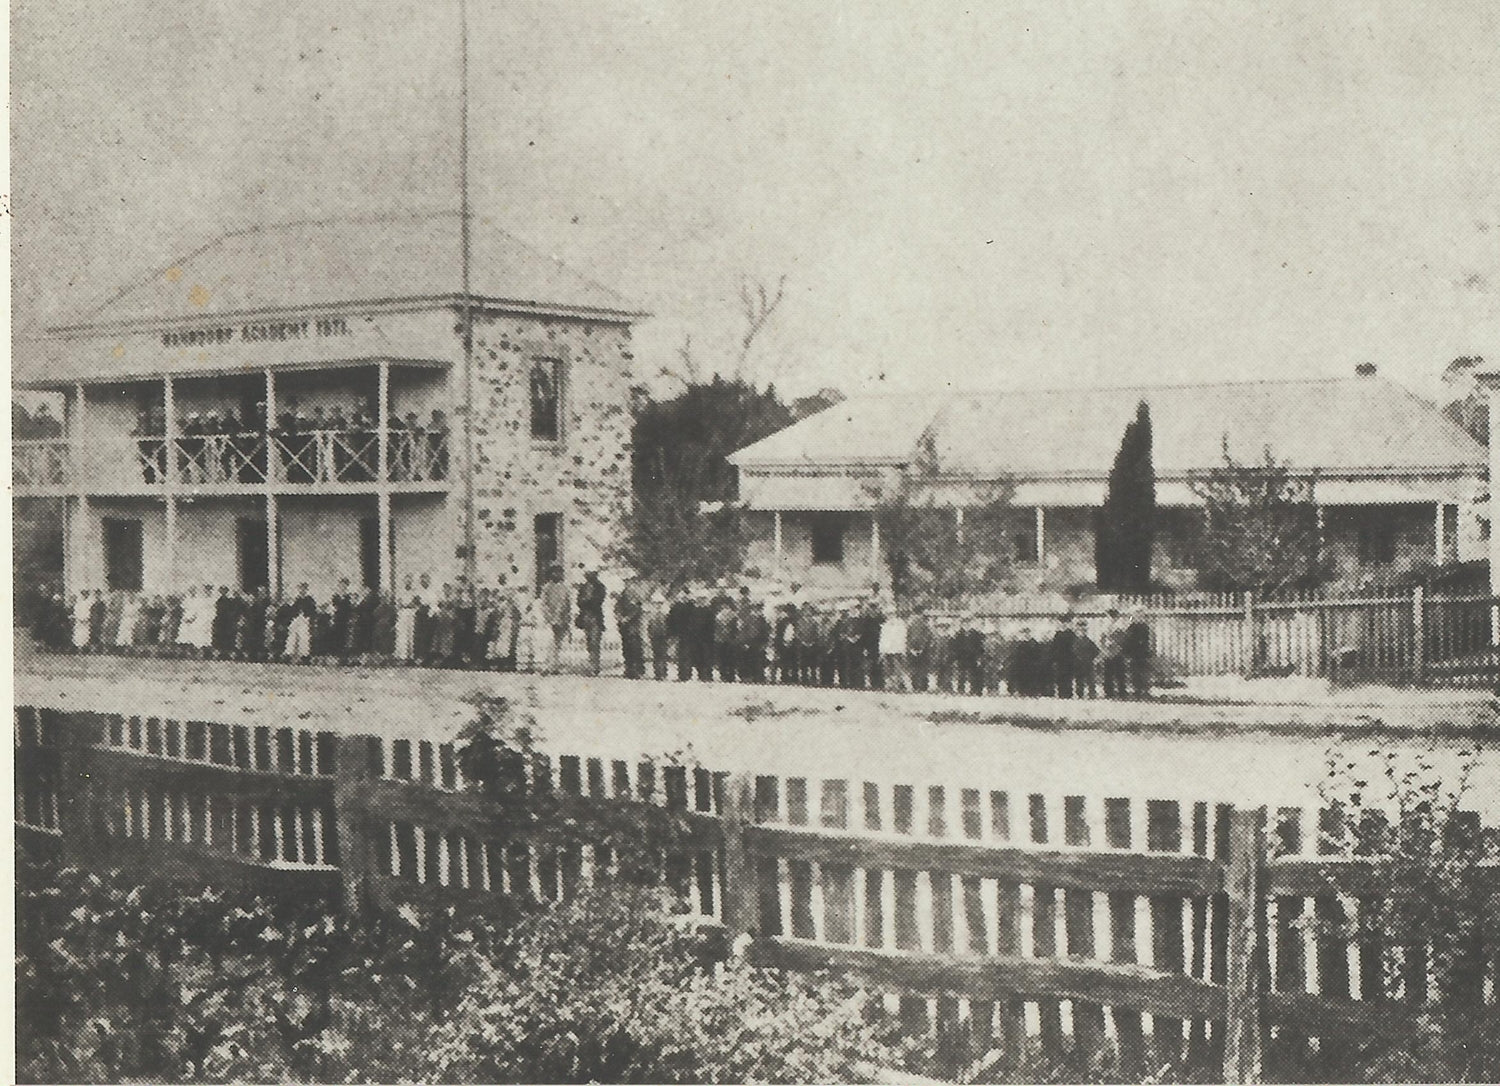 Hahndorf in the 1900's